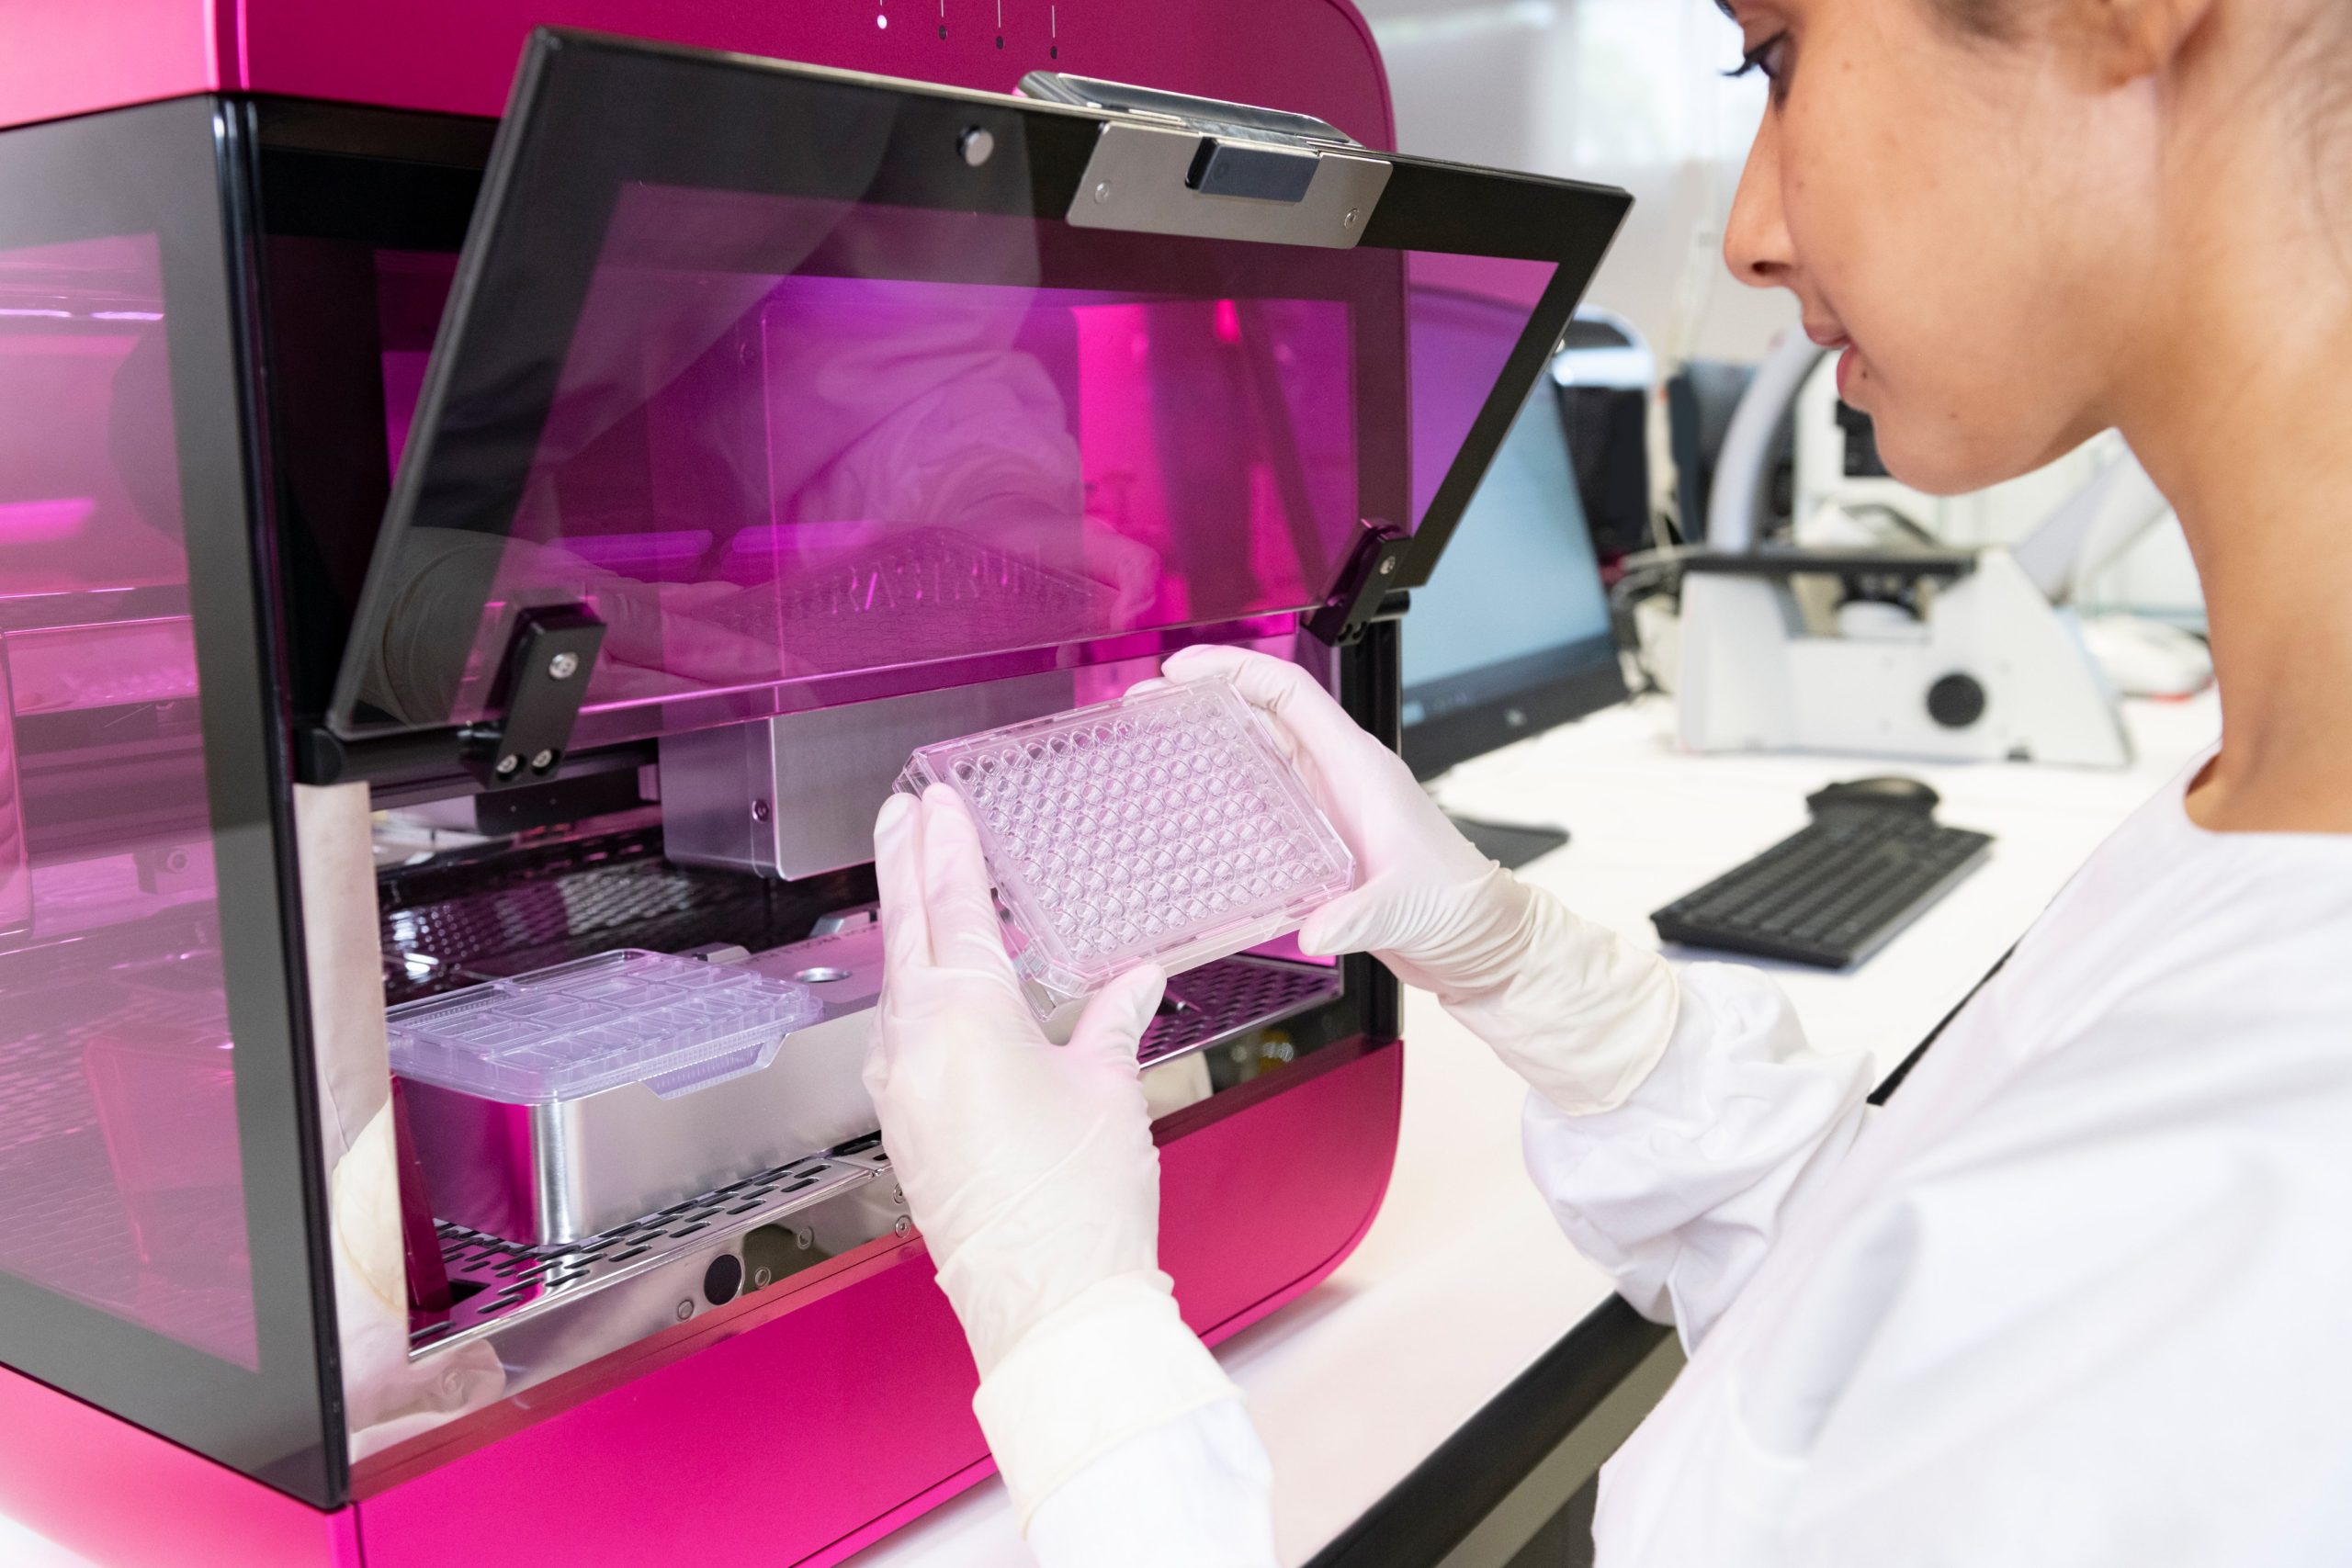 Inventia Life Science raises $25M, launches ‘RASTRUM’ 3D bioprinting know-how within the U.S.